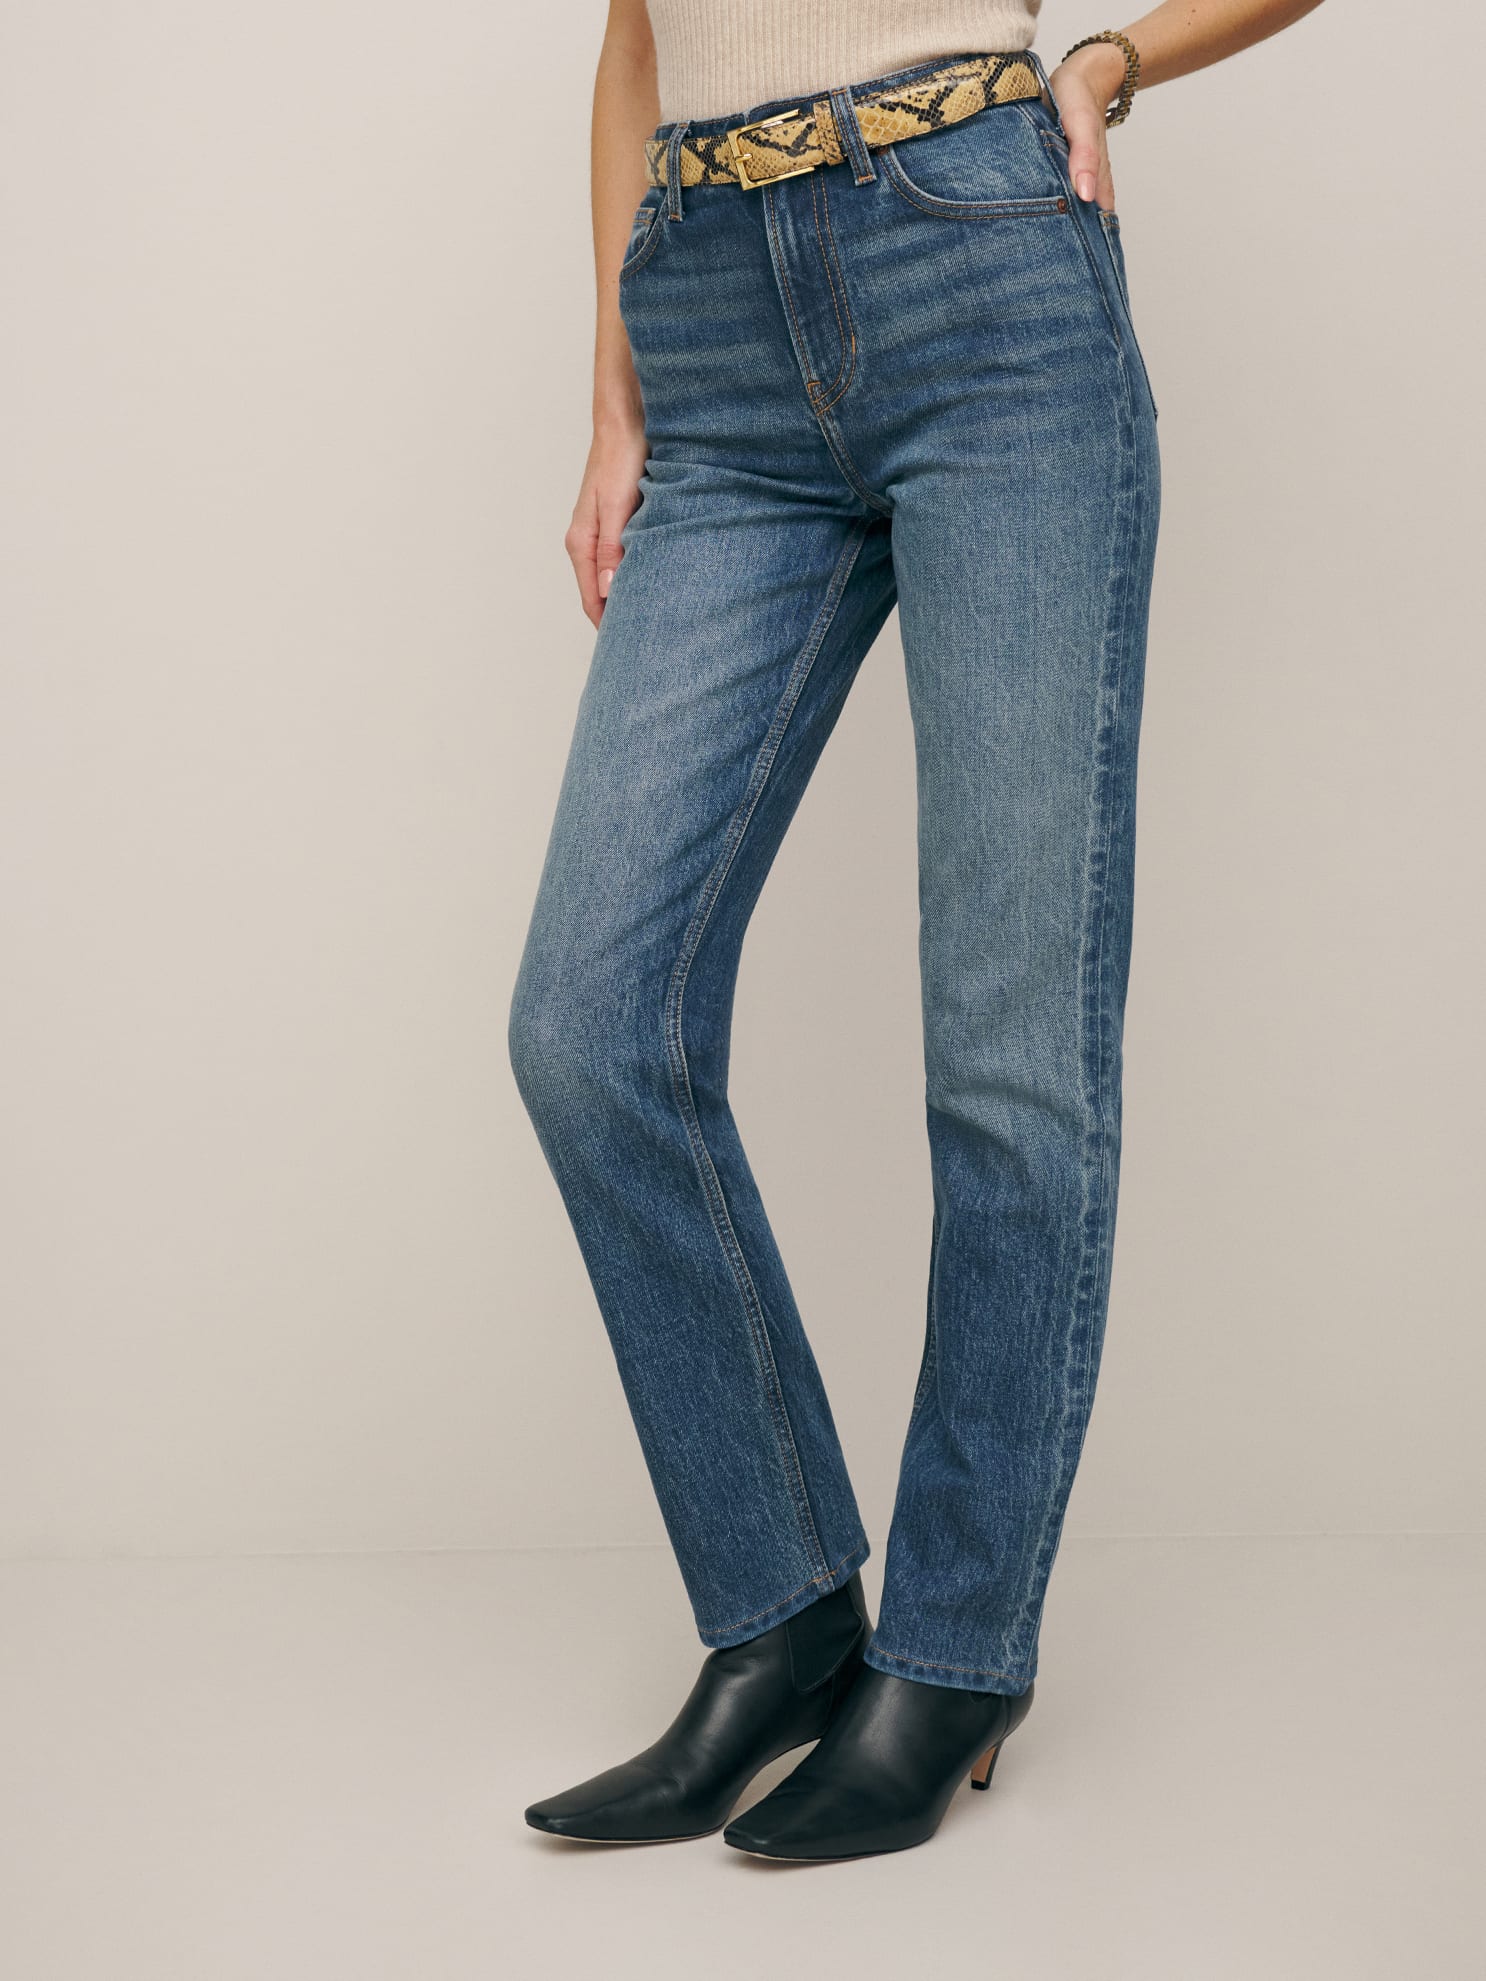 Reformation Liza Ultra High Rise Straight Jeans In Champlain